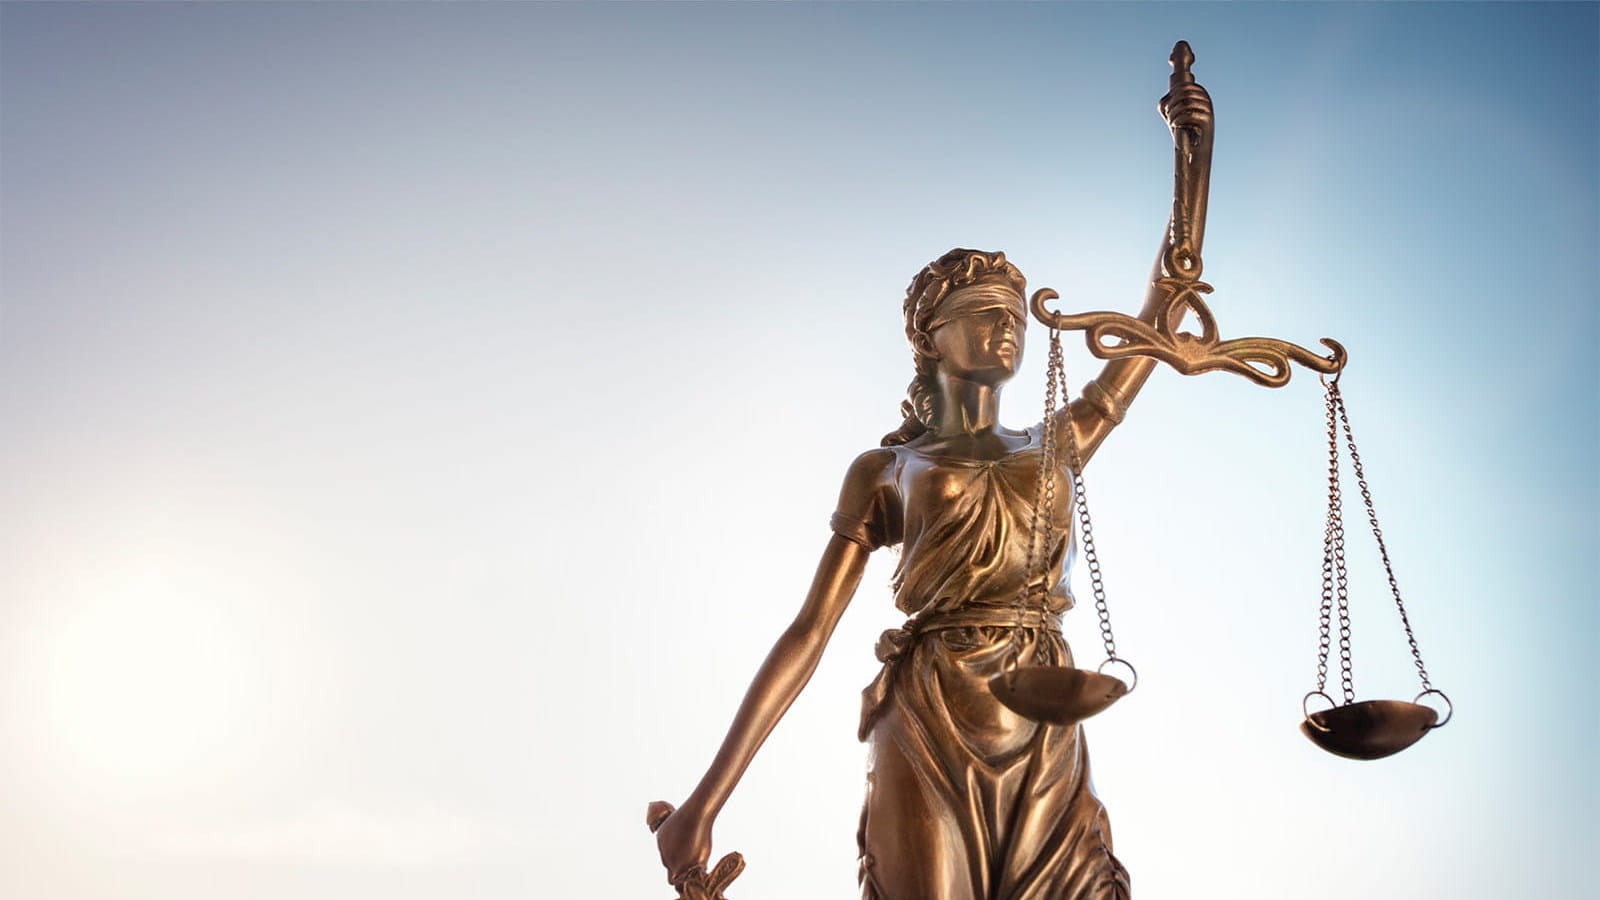 ICAEW Taxline tax domicile taxpayer lady justice statue bronze court case